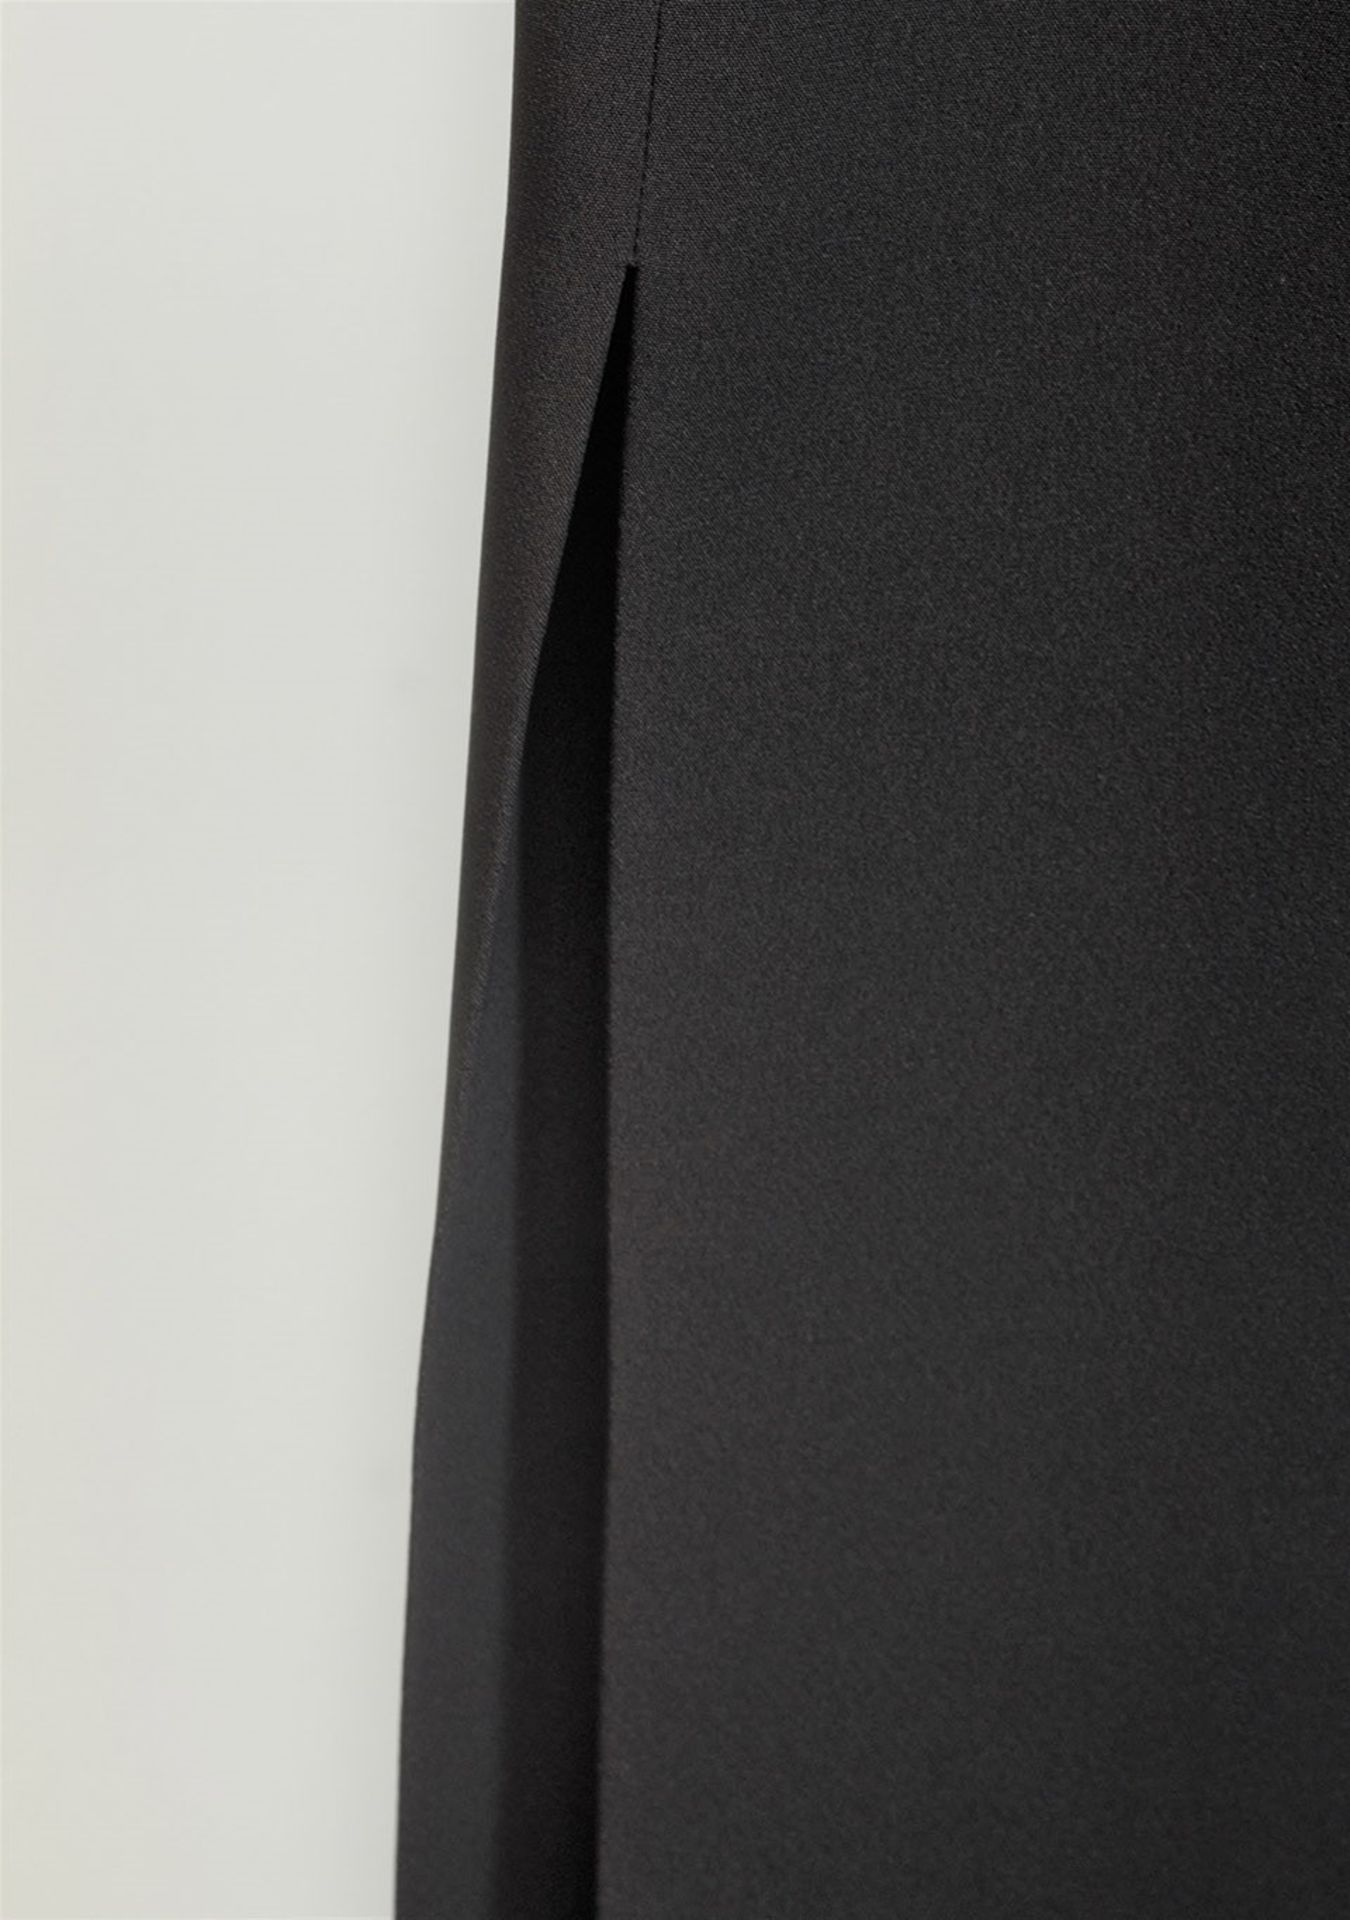 1 x Boutique Le Duc Black Skirt - From a High End Clothing Boutique In The Netherlands - - Image 3 of 7